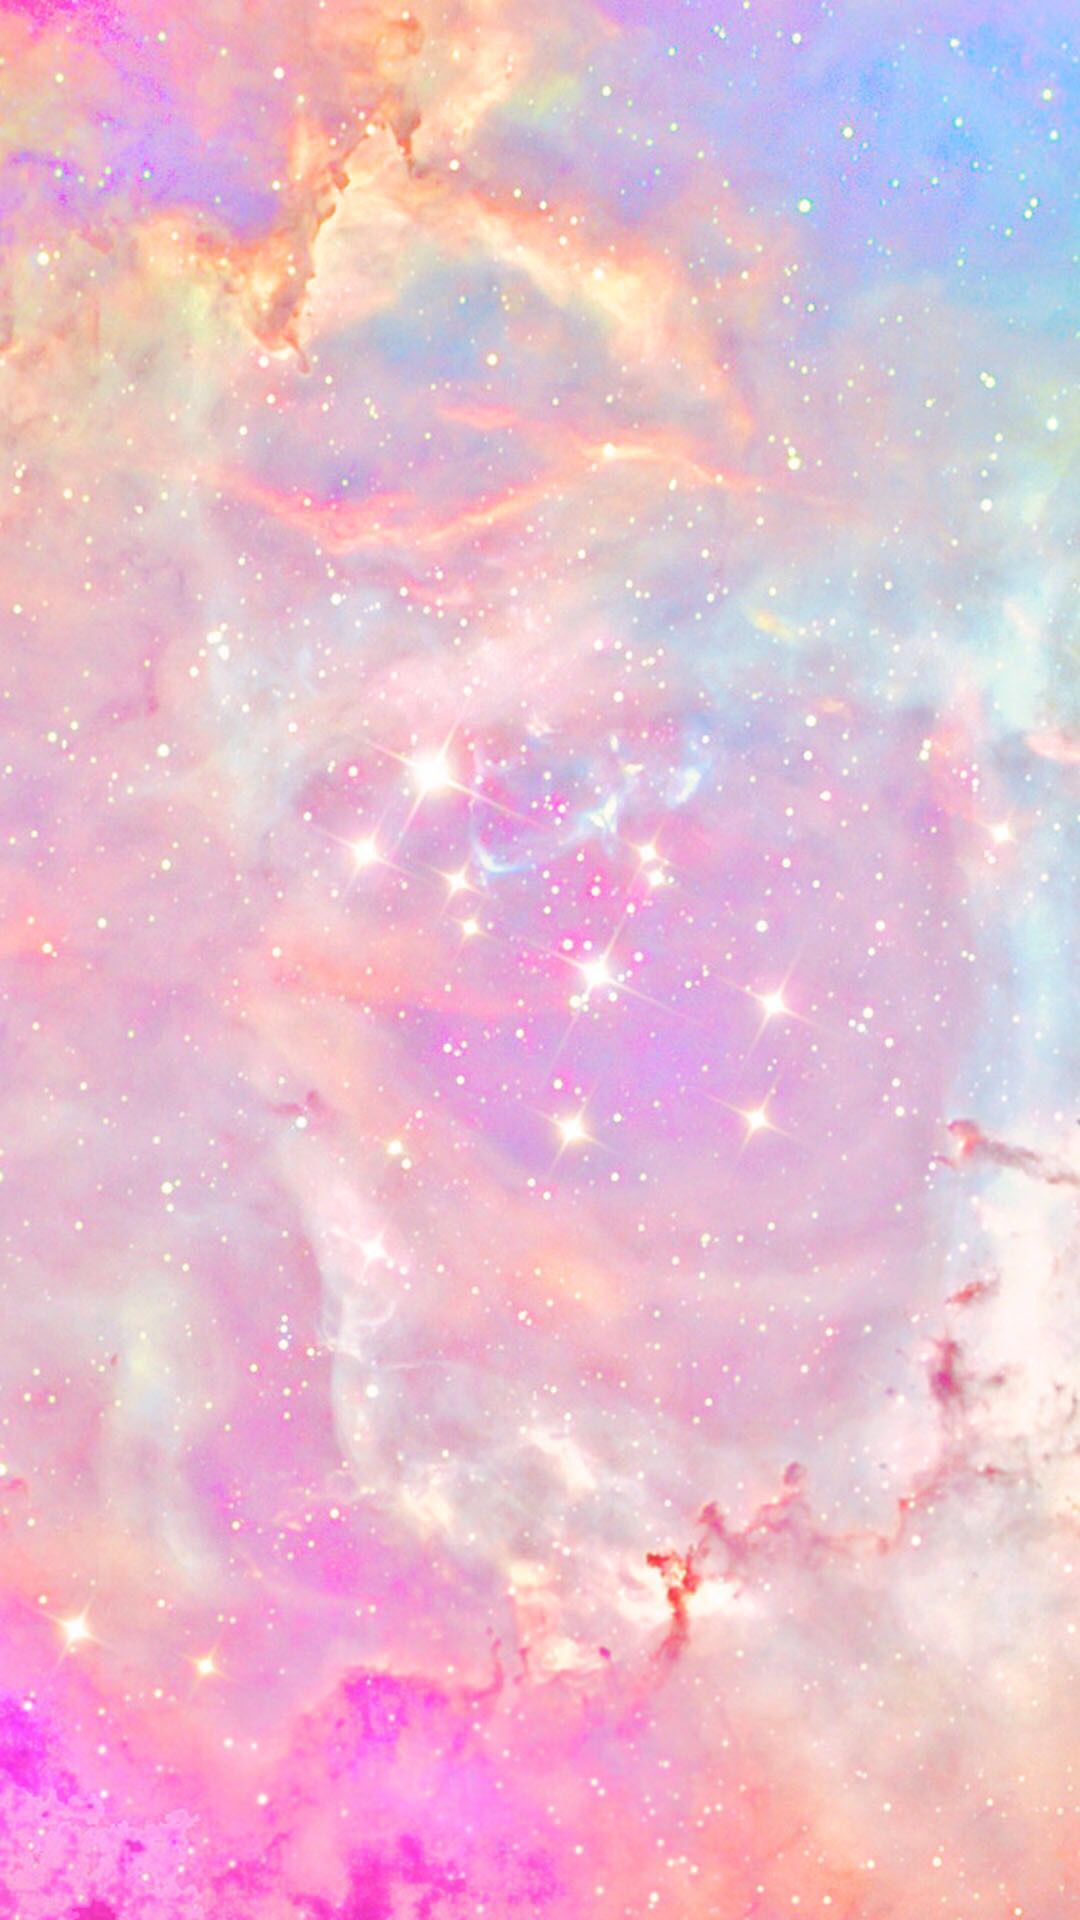 5600 Pastel Galaxy Stock Photos Pictures  RoyaltyFree Images  iStock